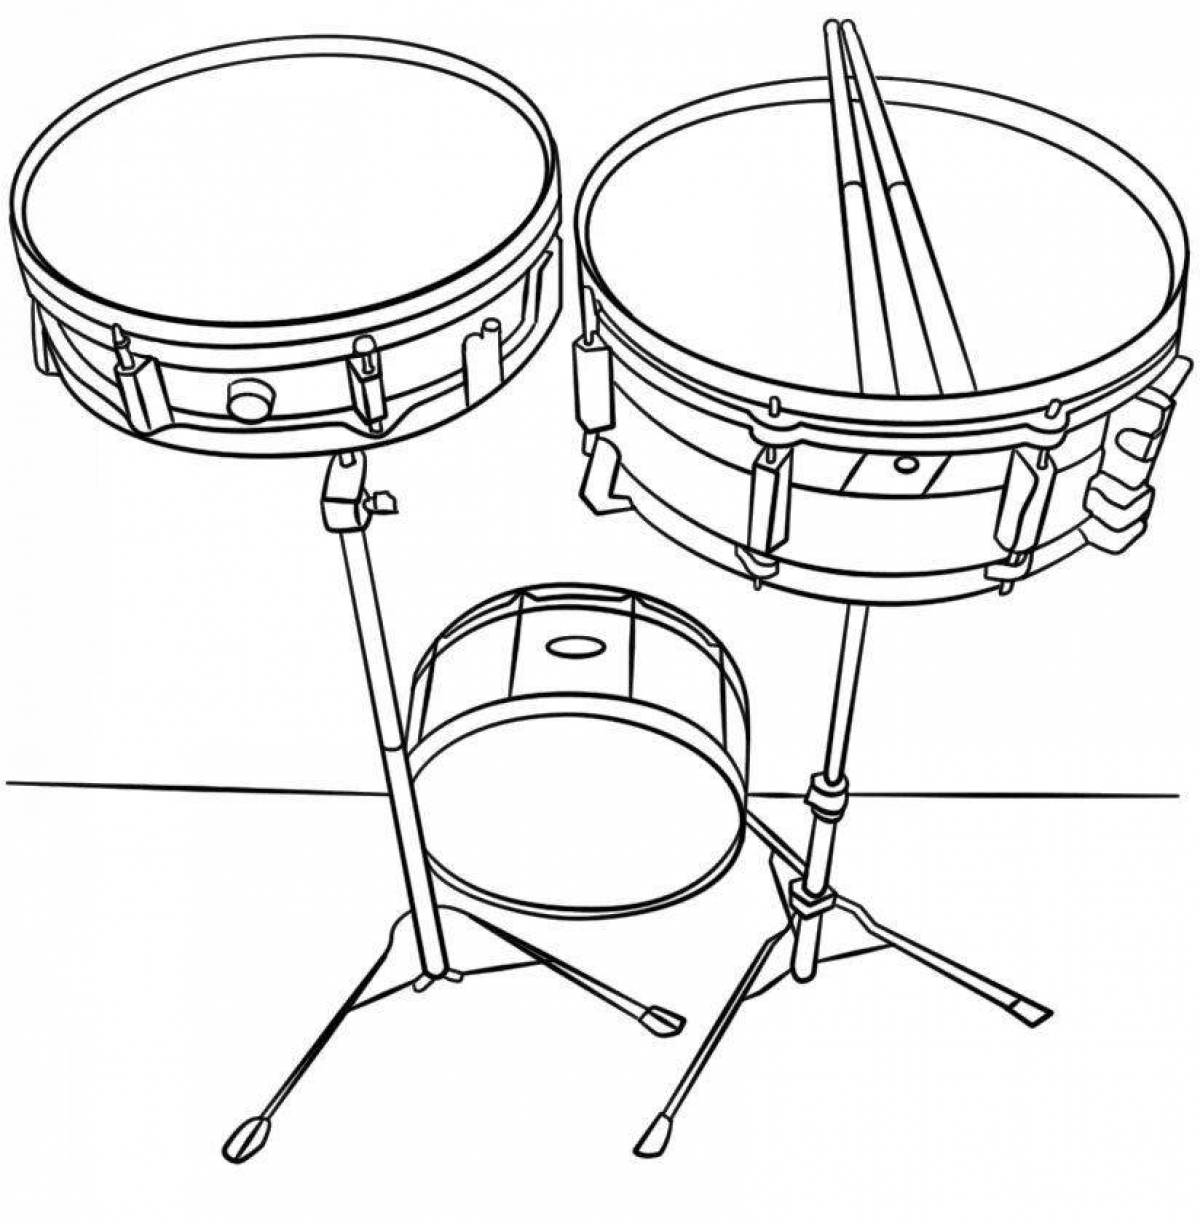 Adorable drum coloring book for kids